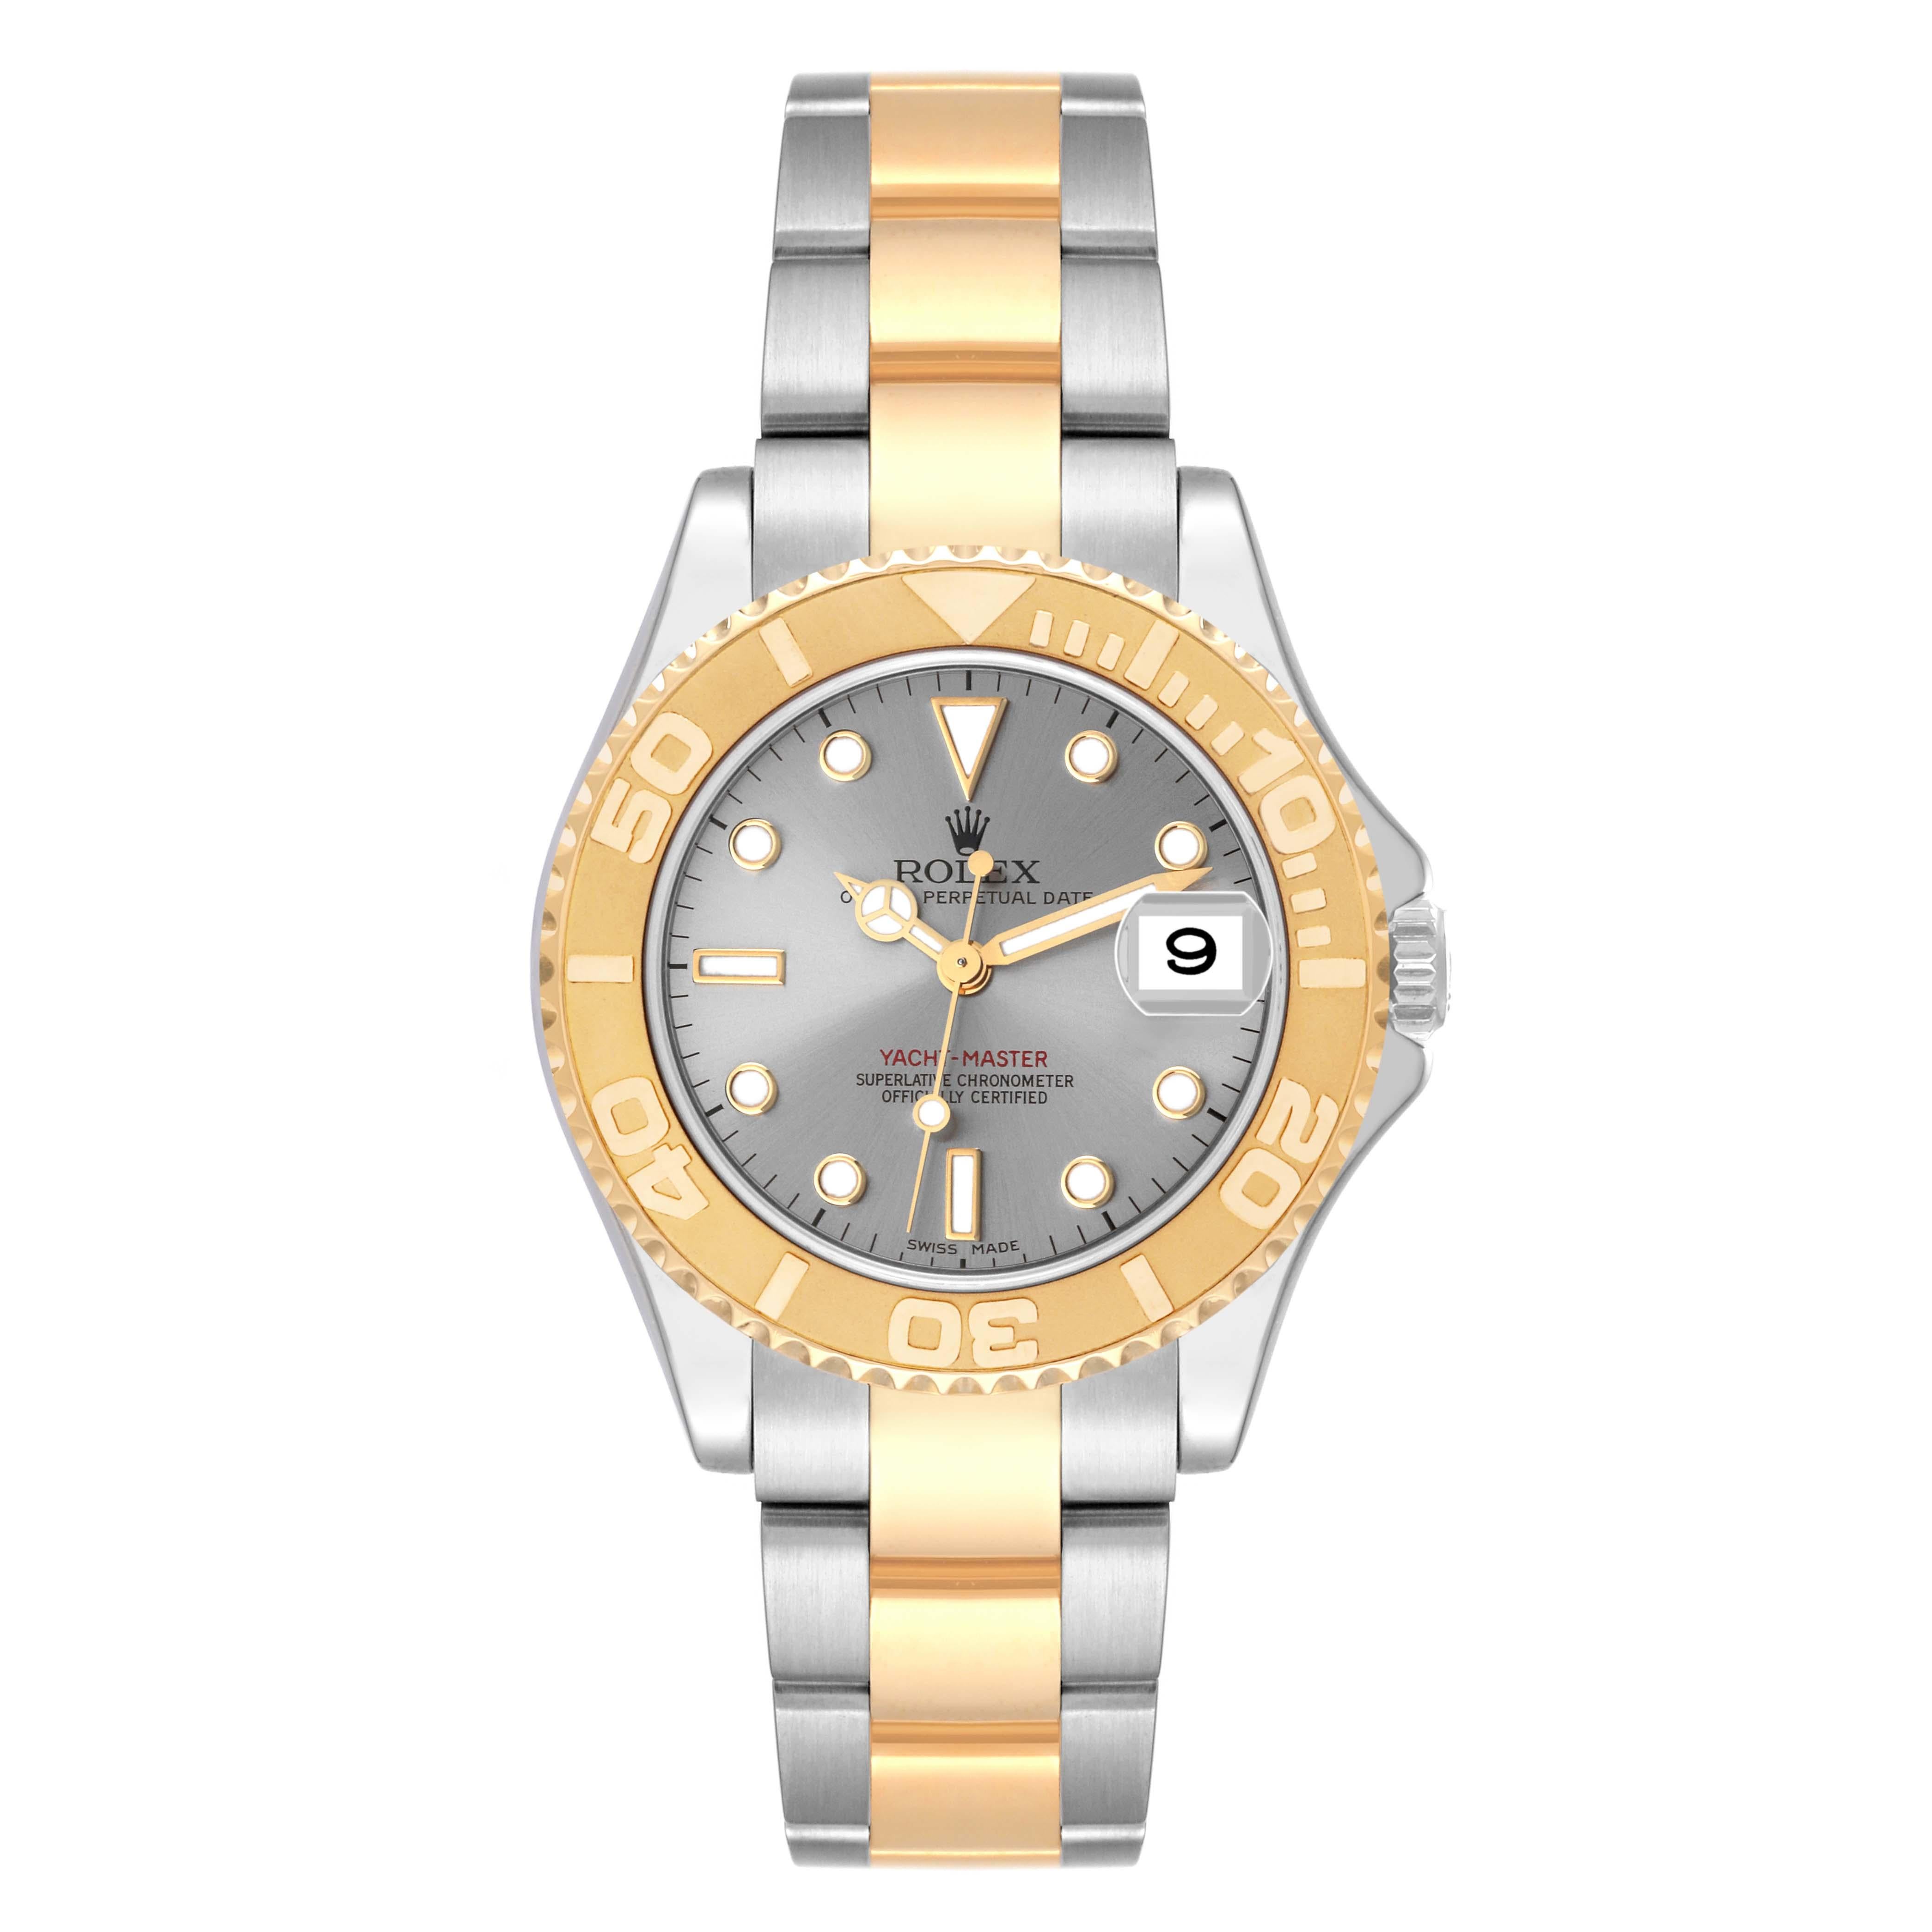 Rolex Yachtmaster Midsize Steel Yellow Gold Mens Watch 168623 Box Papers. Officially certified chronometer automatic self-winding movement. Stainless steel and 18K yellow gold case 35.0 mm in diameter. Rolex logo on the crown. 18K yellow gold